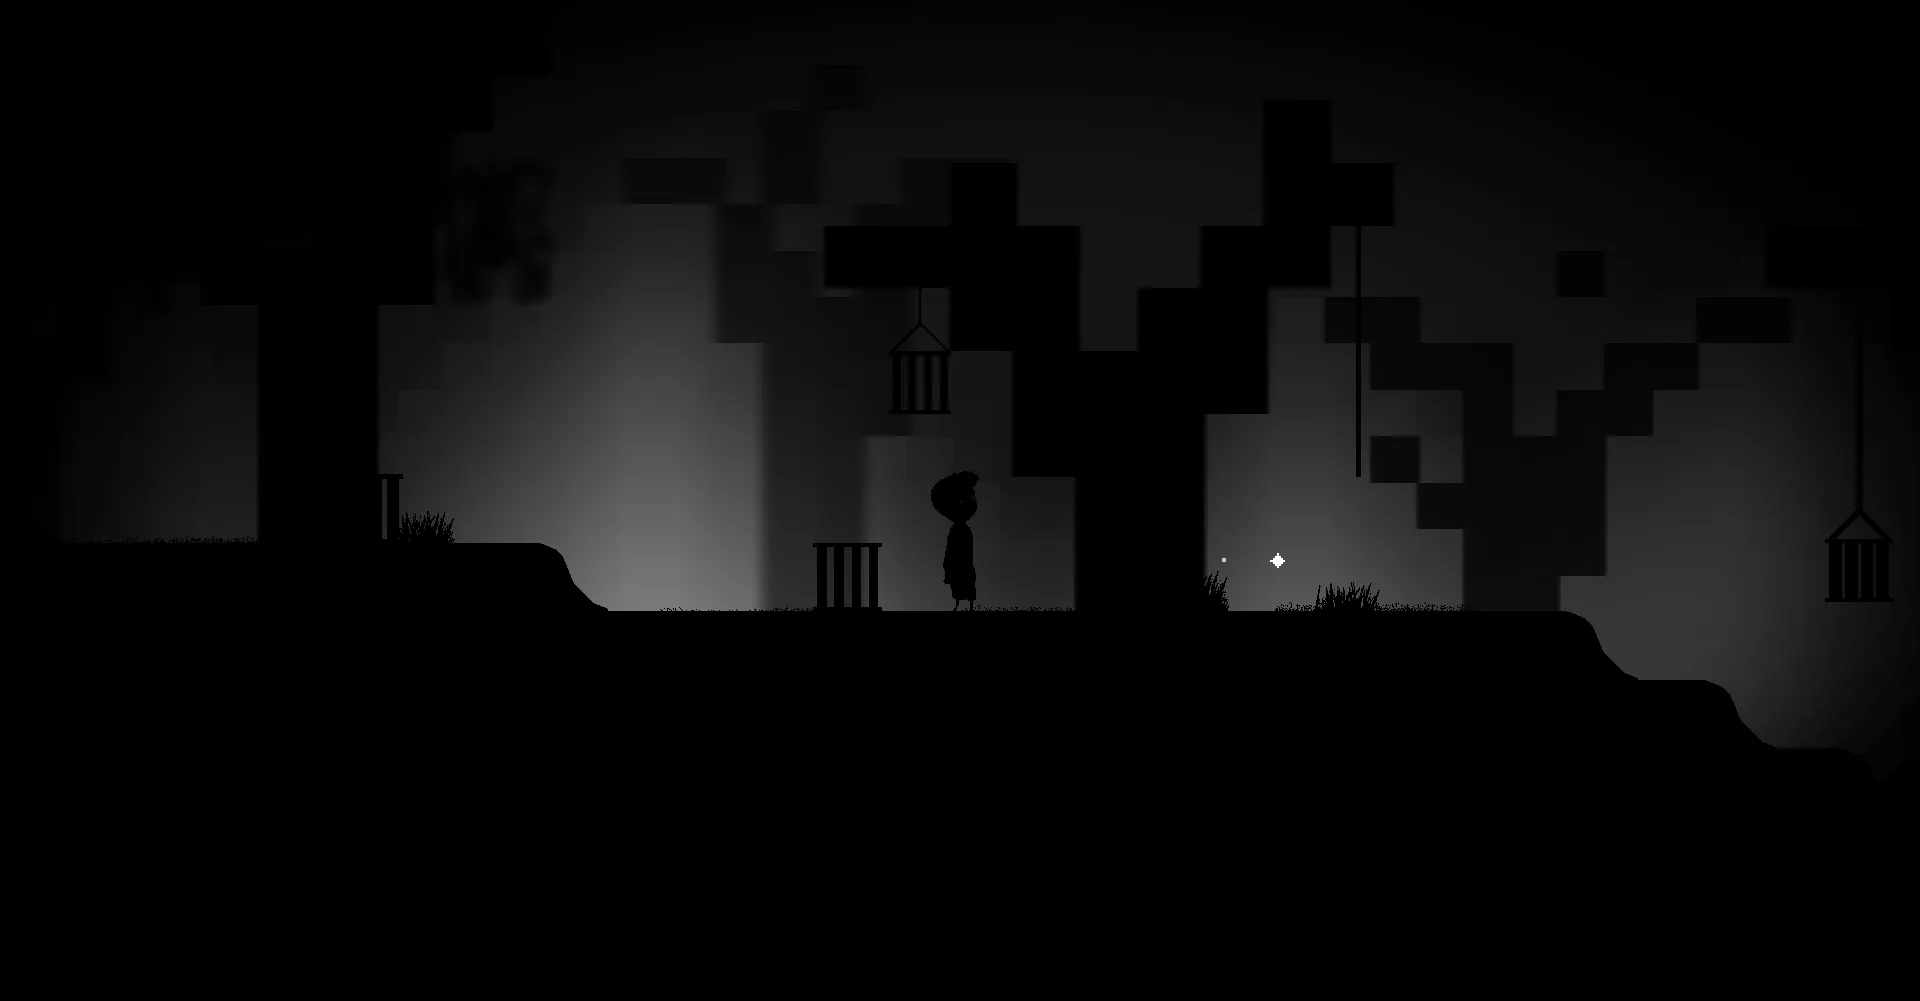 A direct screenshot of gameplay showing the player's character traversing his way through this 2D platformer